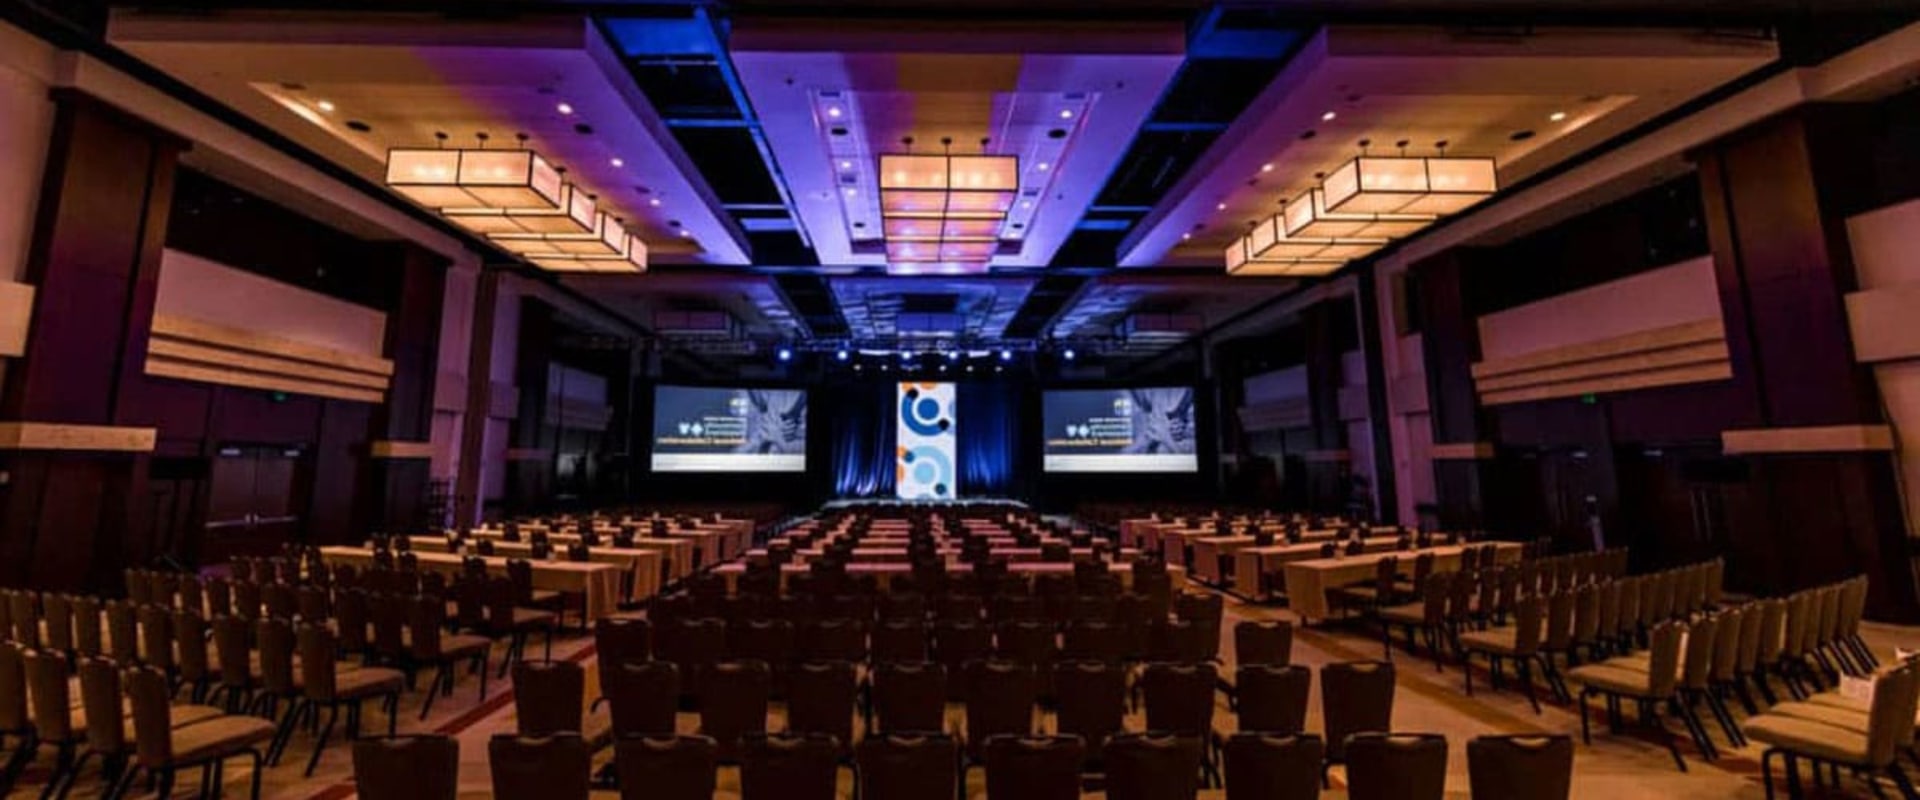 Business Events and Conferences in Scottsdale, AZ - A Comprehensive Guide